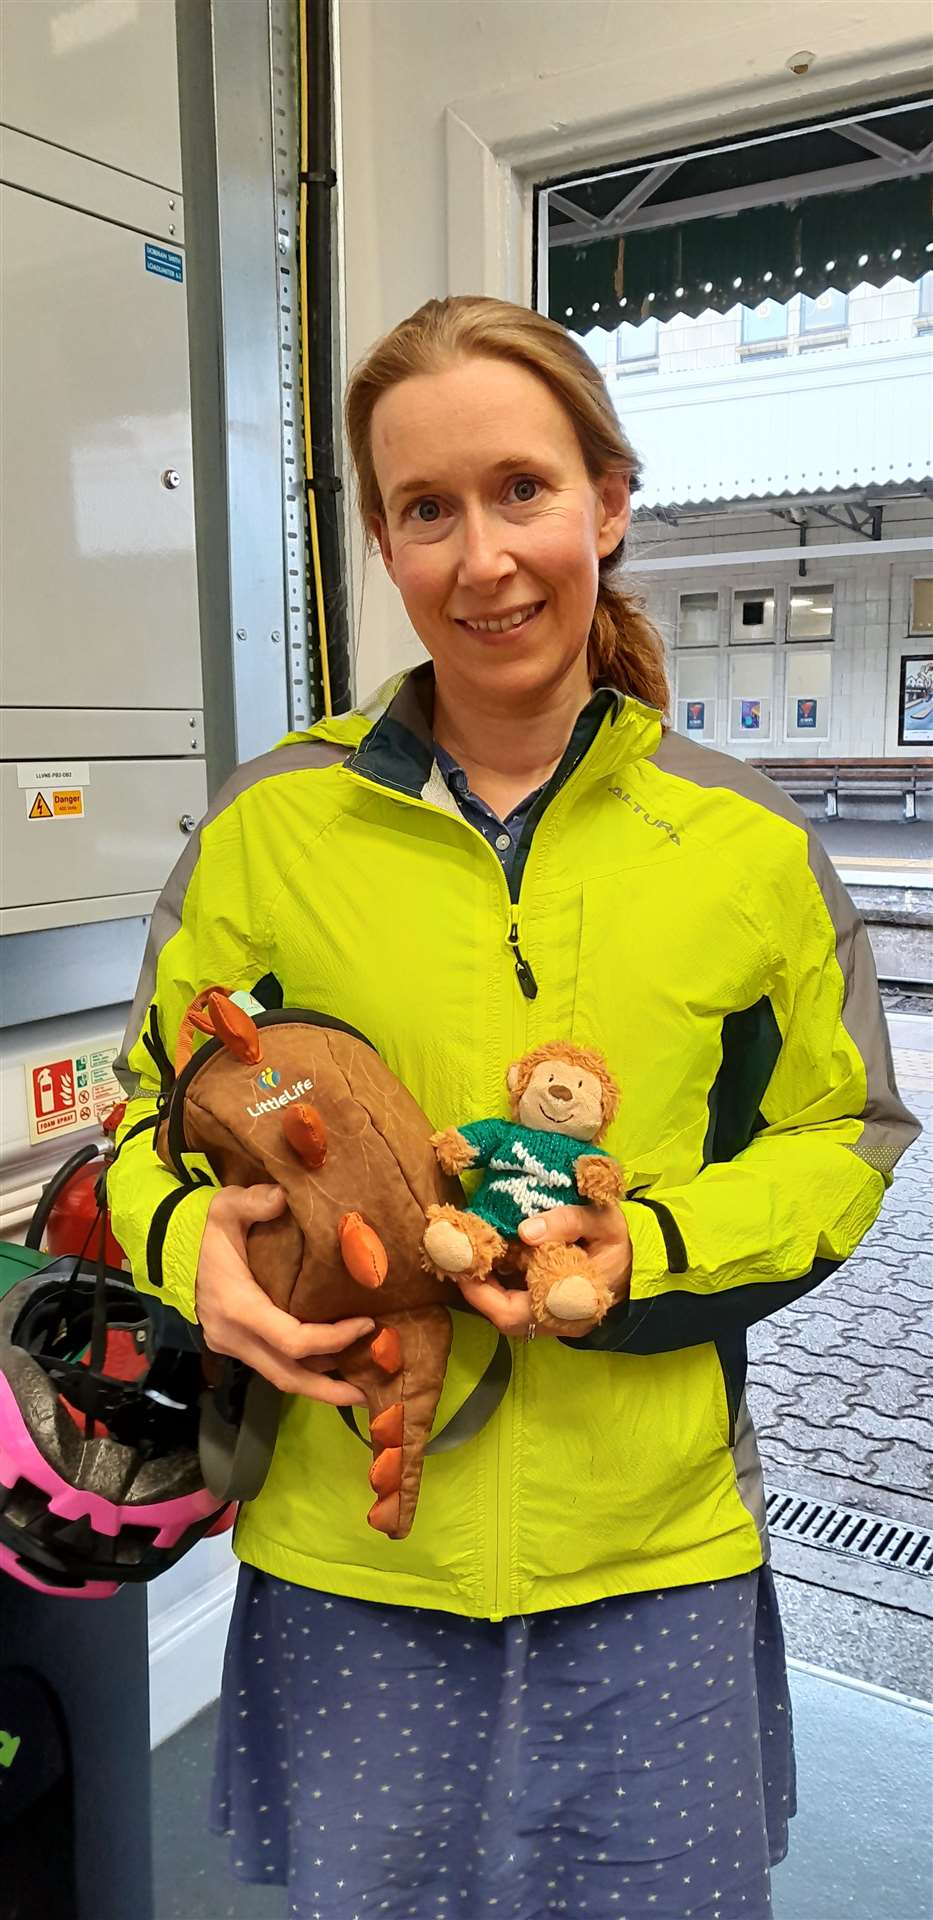 Kayna Tay was delighted when her son’s toy monkey was returned (Network Rail/PA)